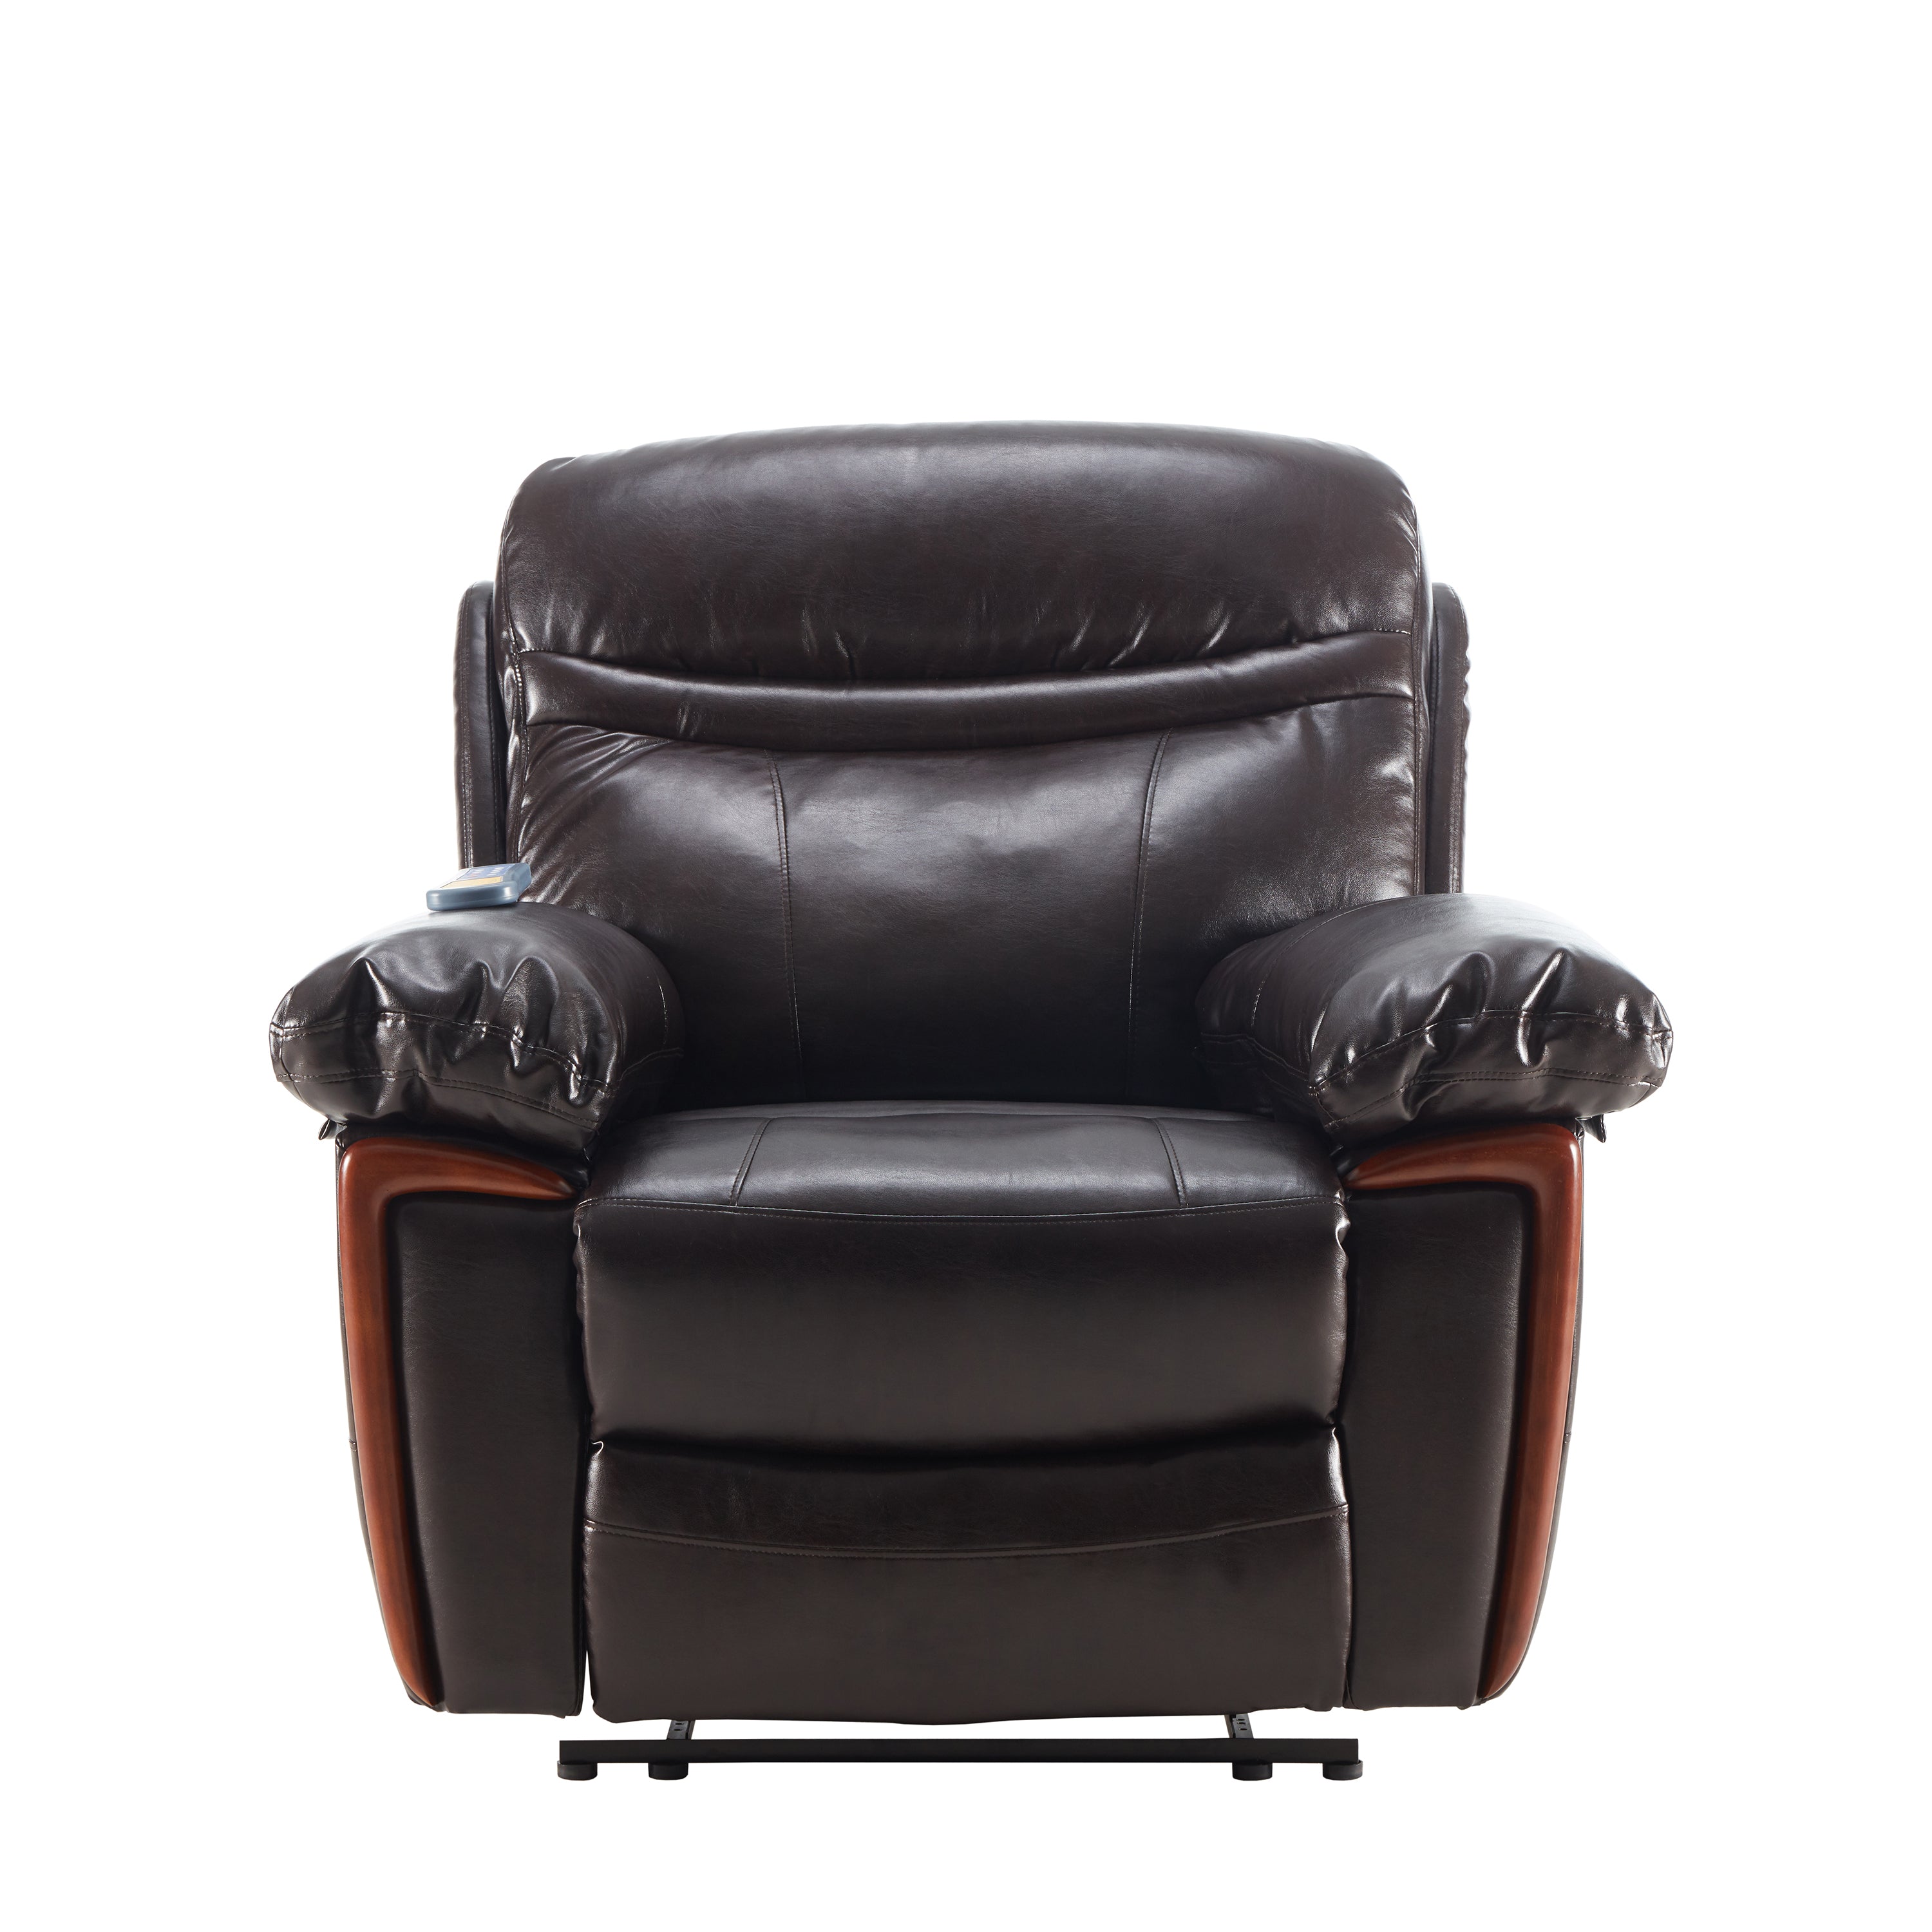 Massage Recliner PU Leather Sofa Chair with Heating and Massage Vibrating Function-Boyel Living